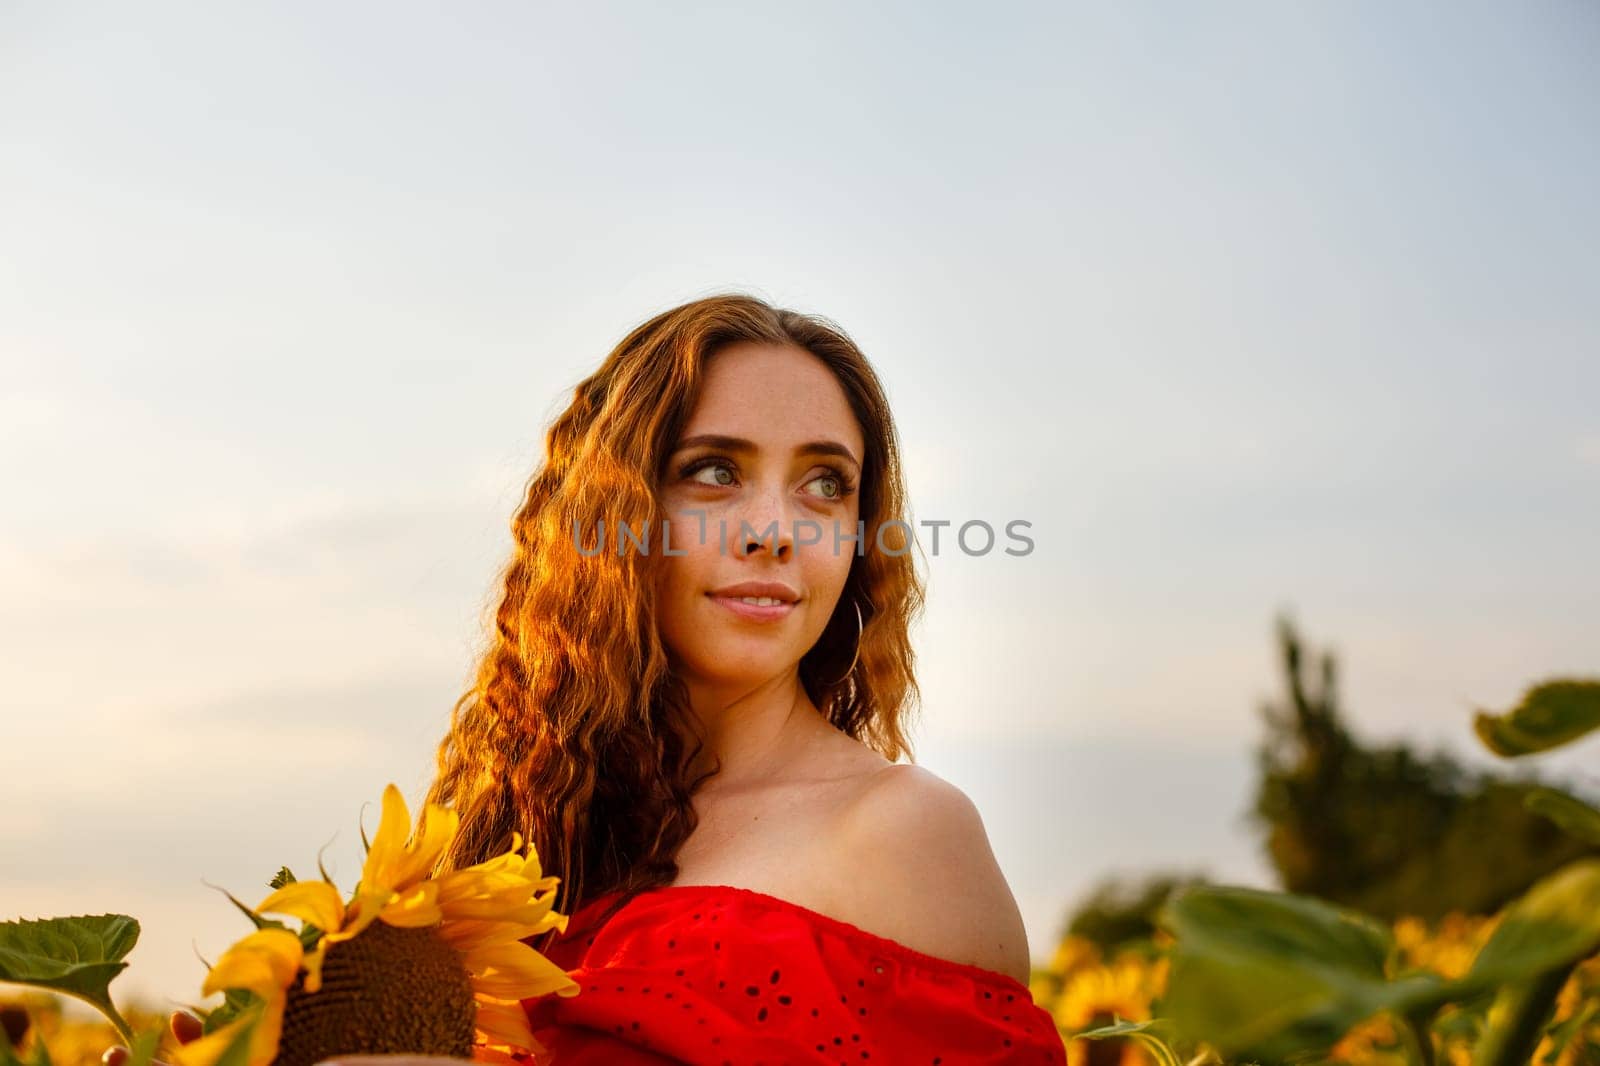 Young woman smiling at sunset in a field of sunflowers. A cute girl of Caucasian appearance in a red dress is happy and free to stand in the evening in the rays. Natural beauty in nature